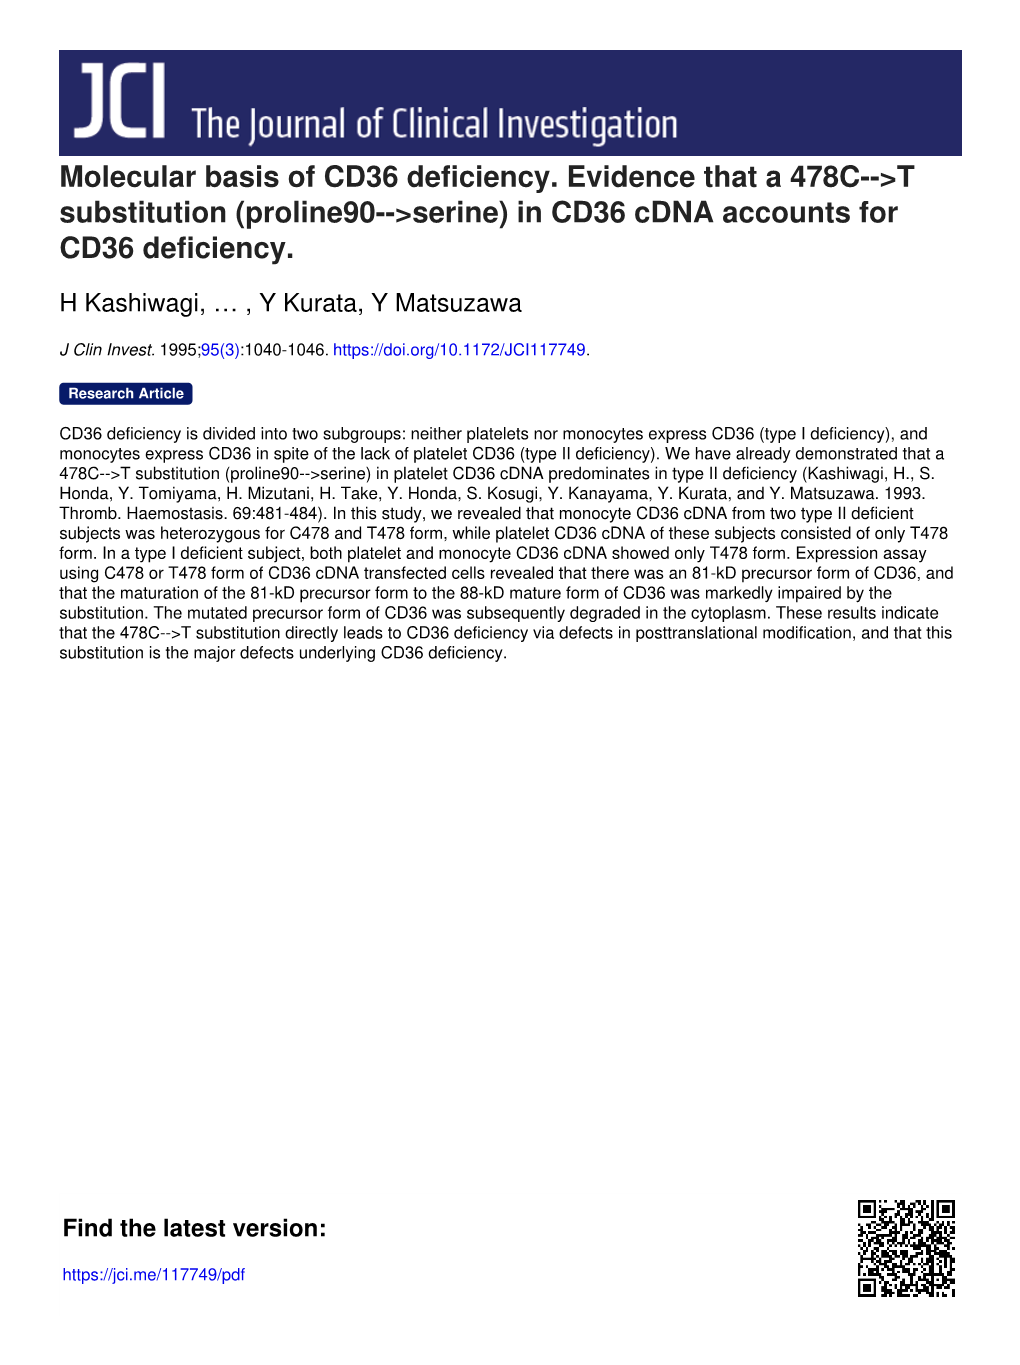 Molecular Basis of CD36 Deficiency. Evidence That a 478C--&gt;T Substitution